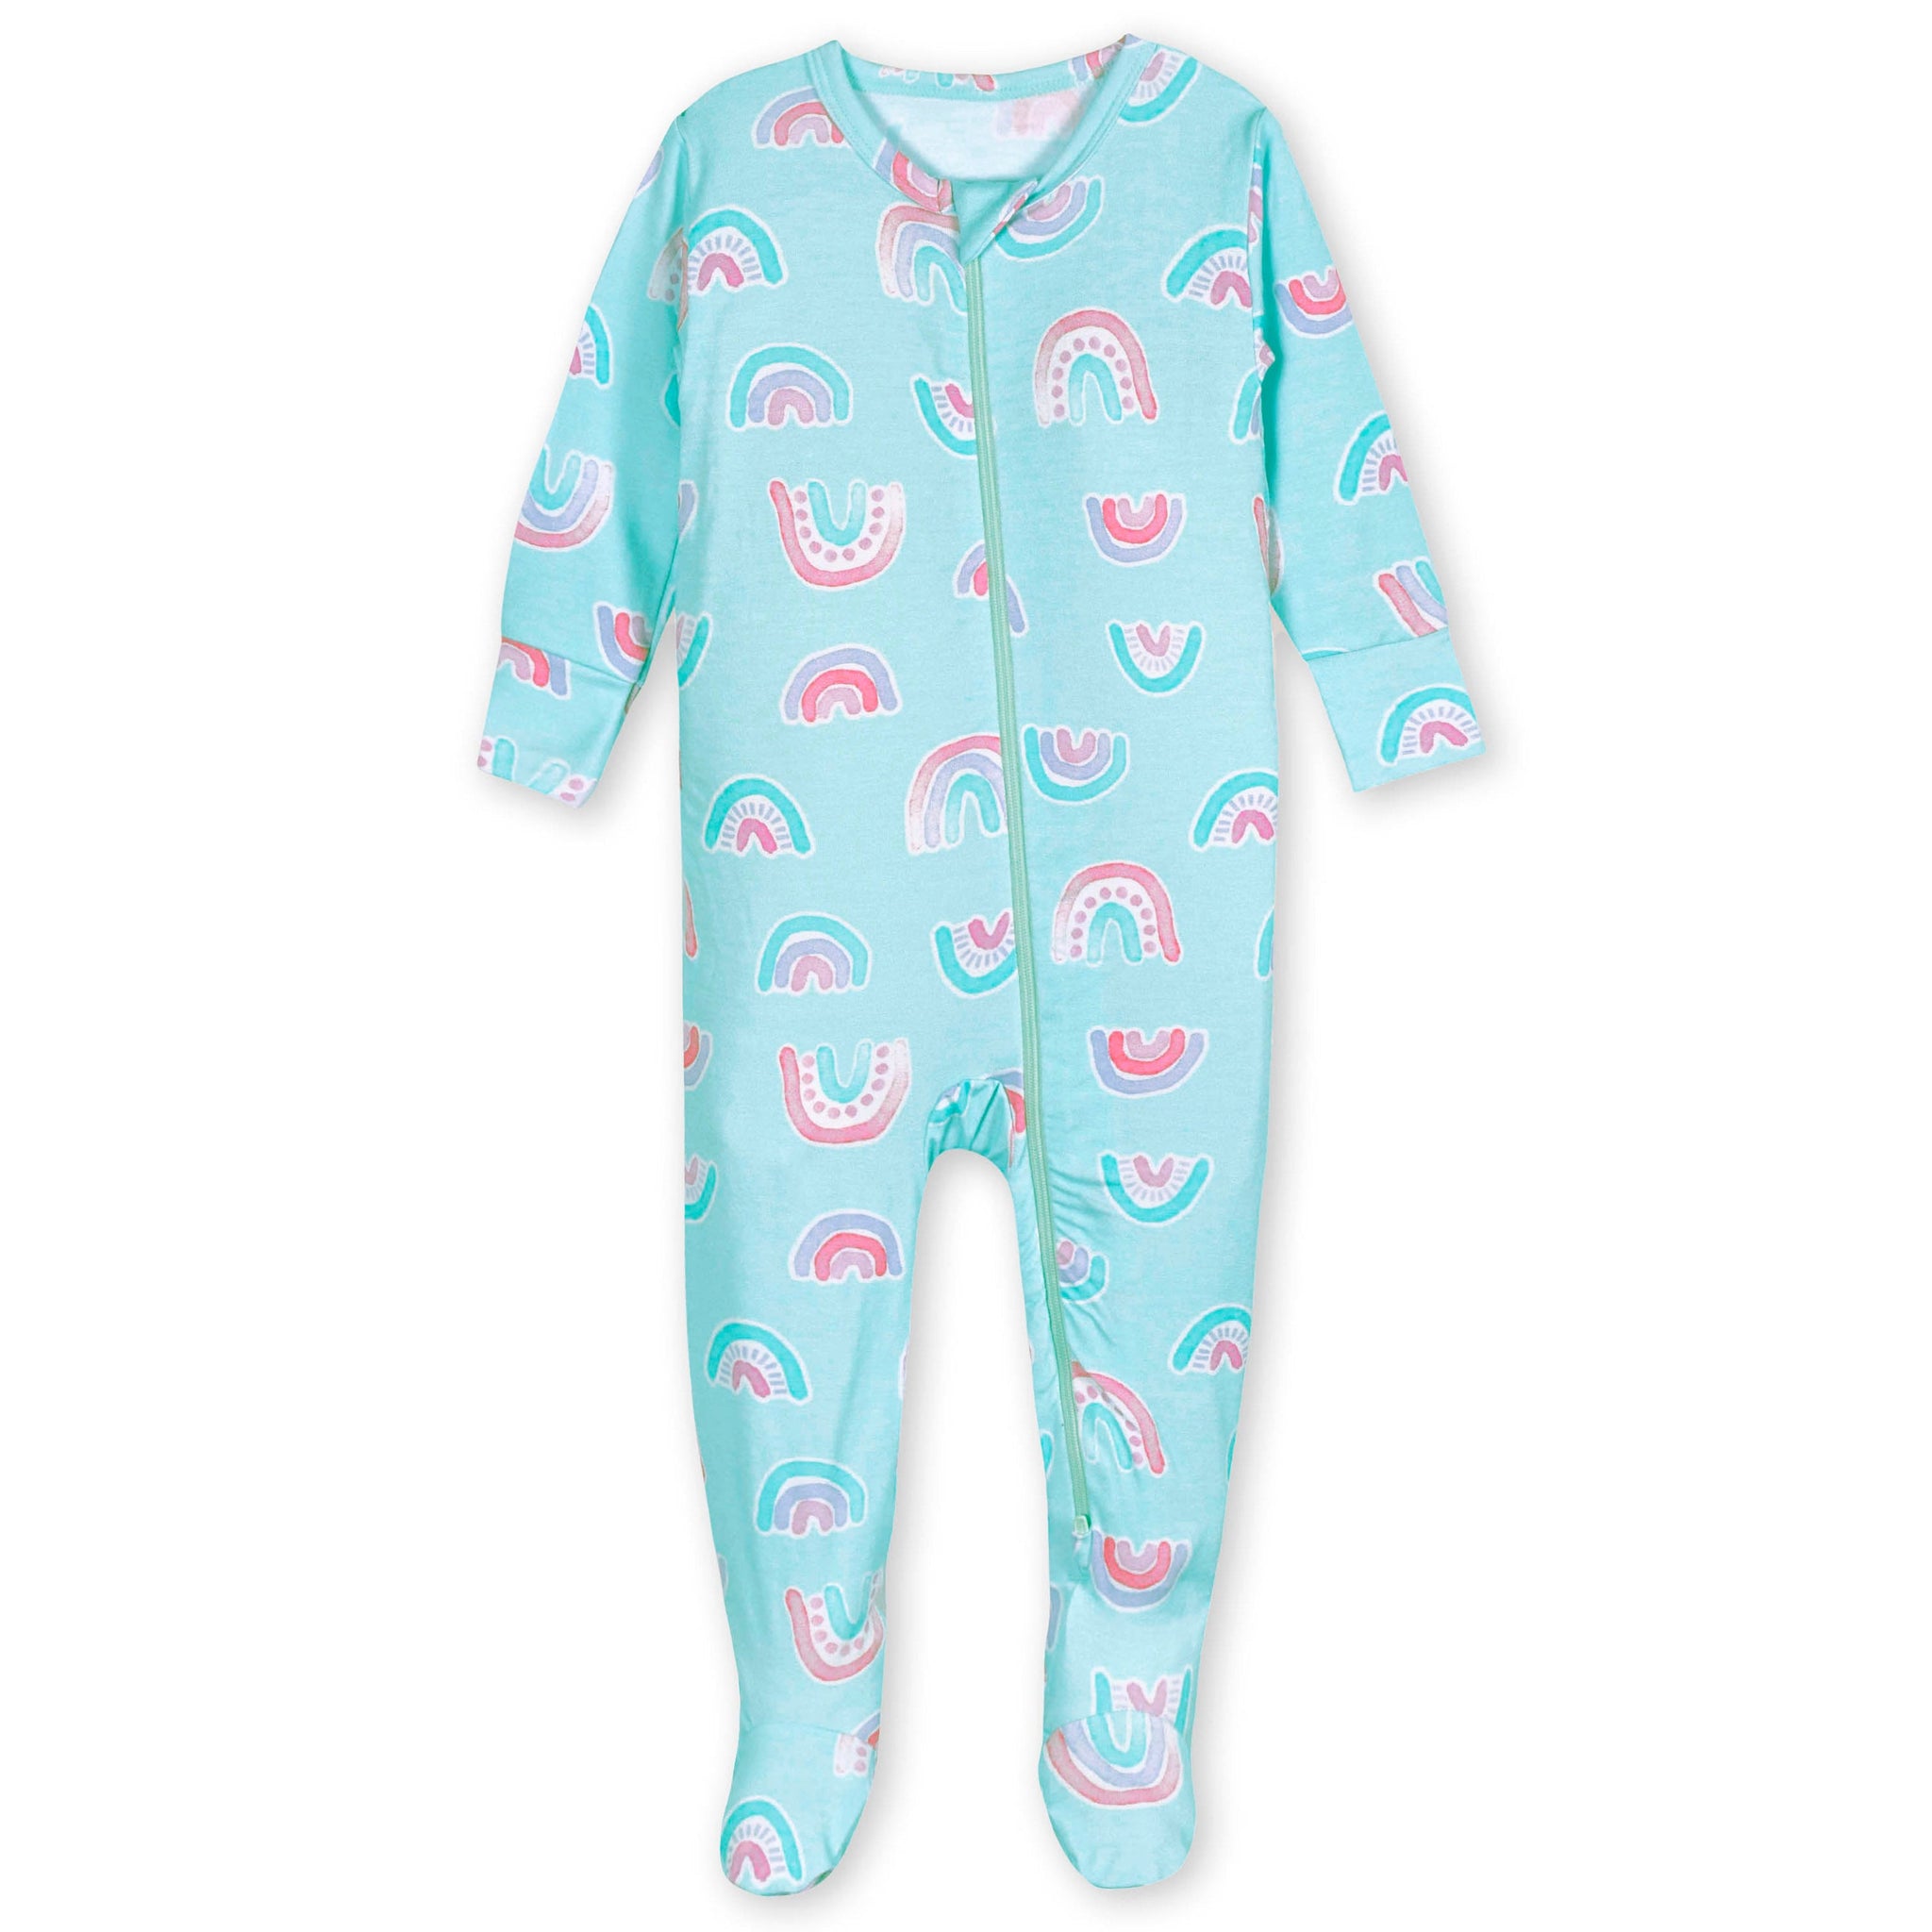 Baby & Toddler Rainbow Sky Buttery Soft Viscose Made from Eucalyptus Snug Fit Footed Pajamas-Gerber Childrenswear Wholesale